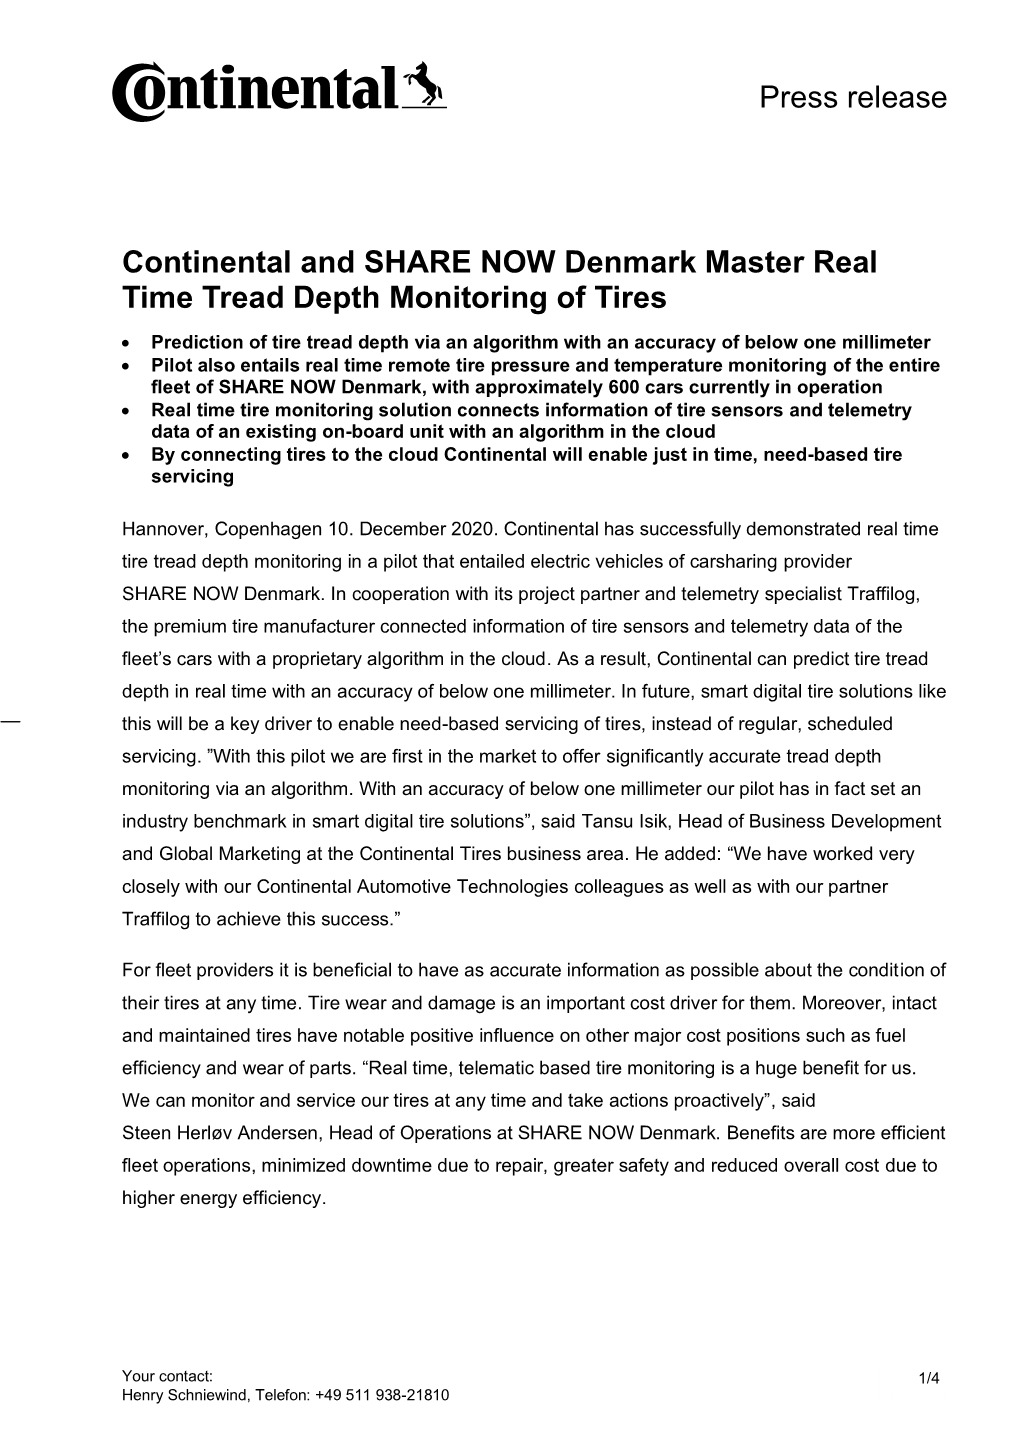 Press Release Continental and SHARE NOW Denmark Master